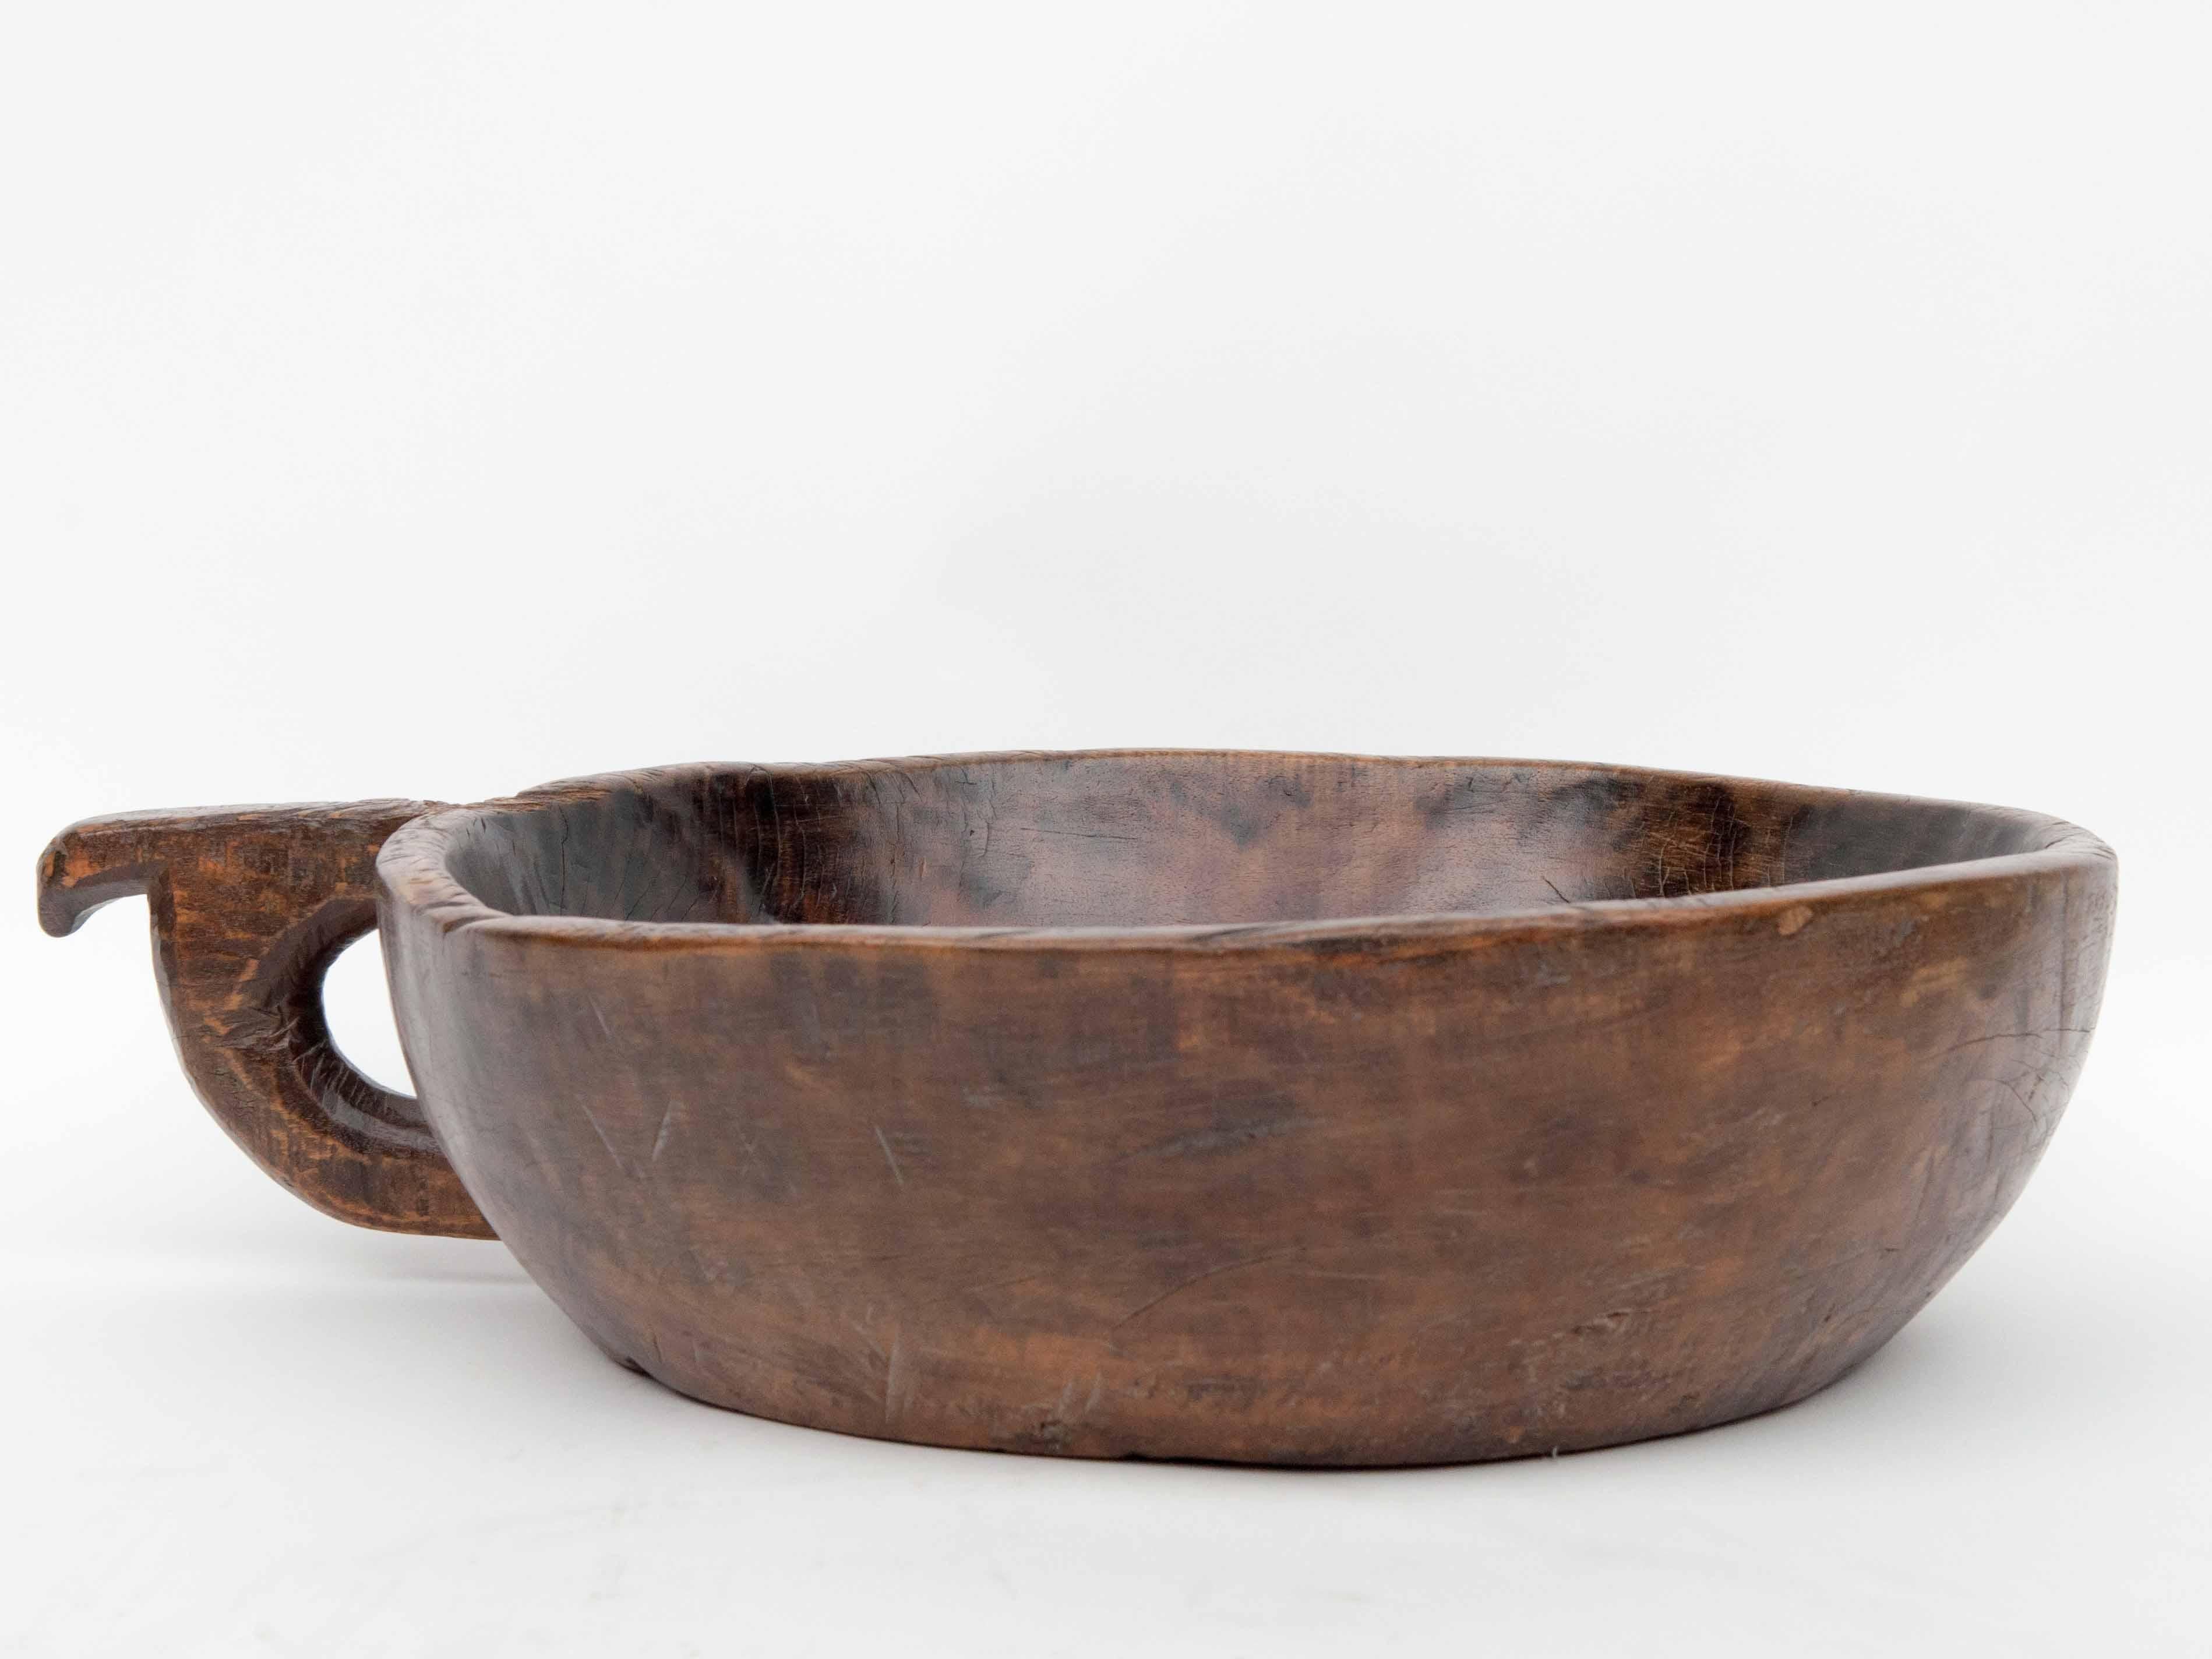 Vintage hand hewn wooden bowl with handle from the Toraja of Sulawesi, Indonesia. Mid-late 20th century.
This lovely bowl from the mountains of Sulawesi, has been fashioned by hand from a single piece of wood, and is imbued with a dark spotted